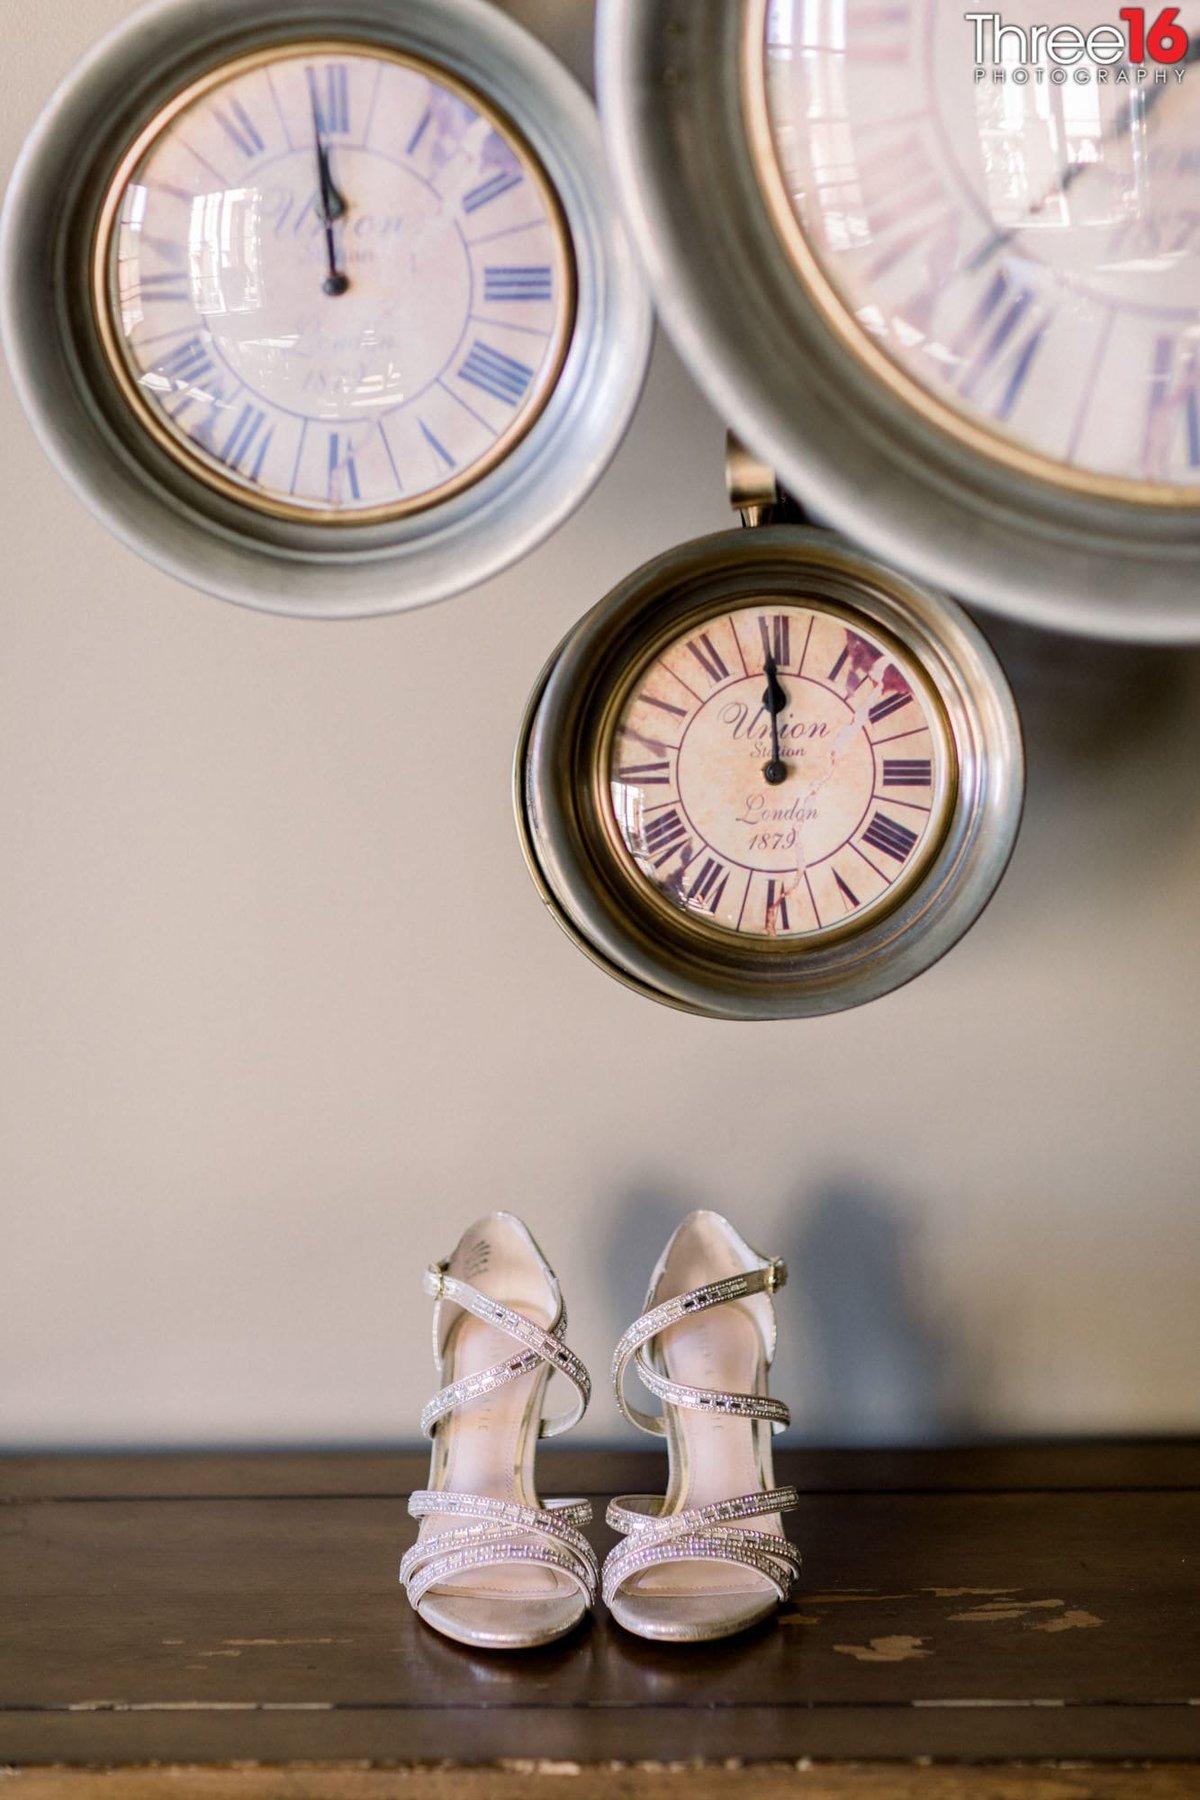 The time is right for the Bride's shoes